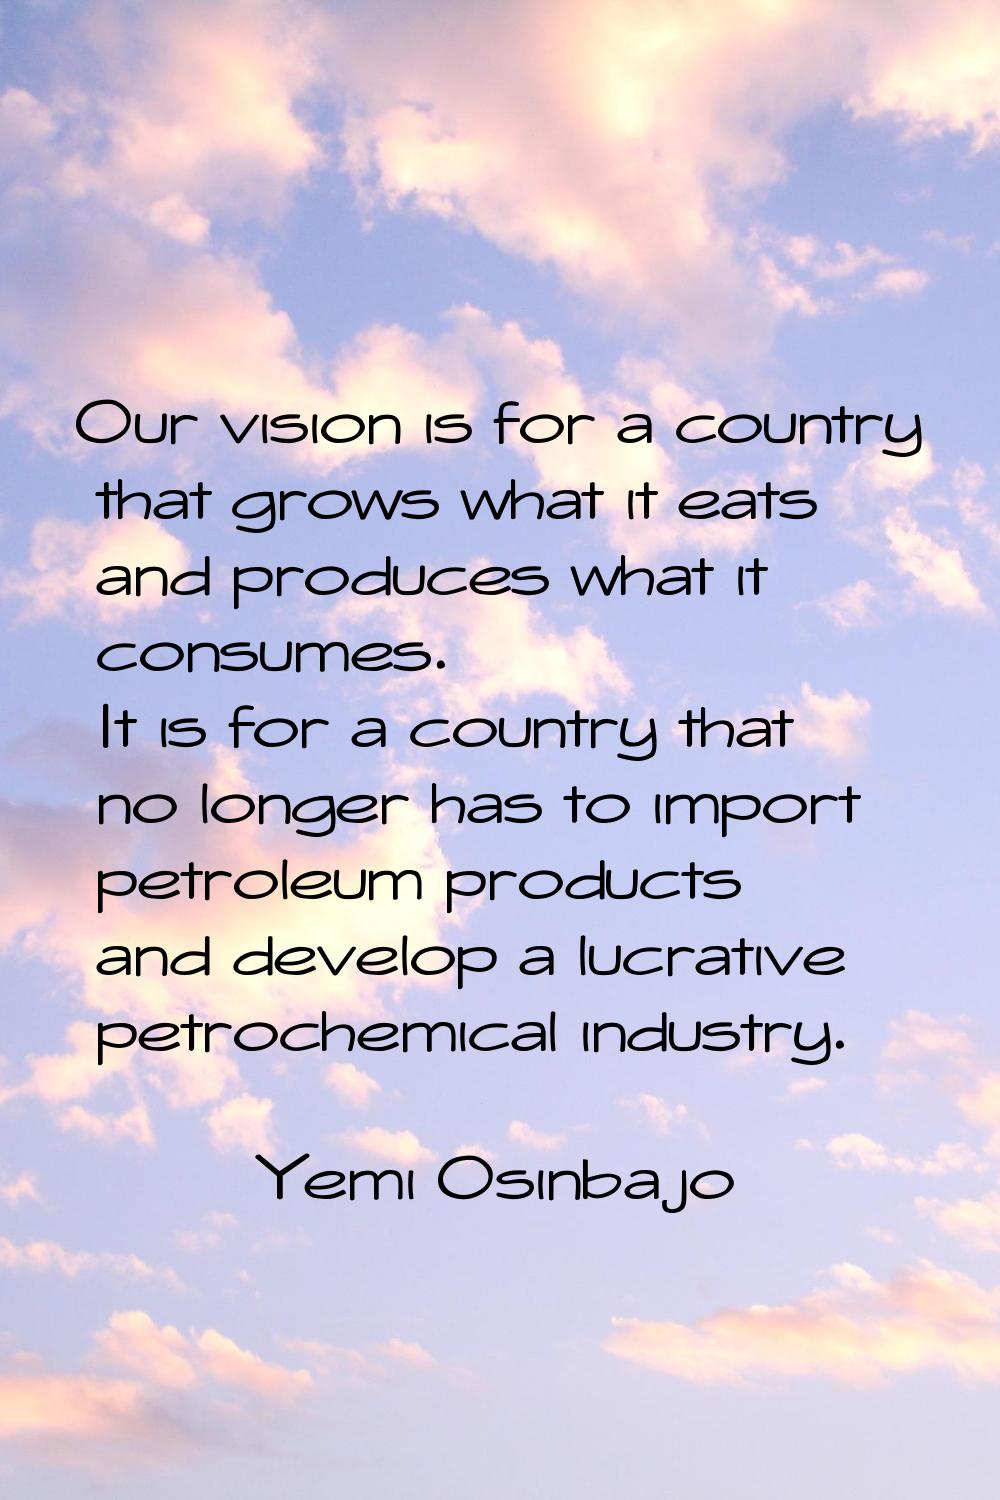 Our vision is for a country that grows what it eats and produces what it consumes. It is for a coun